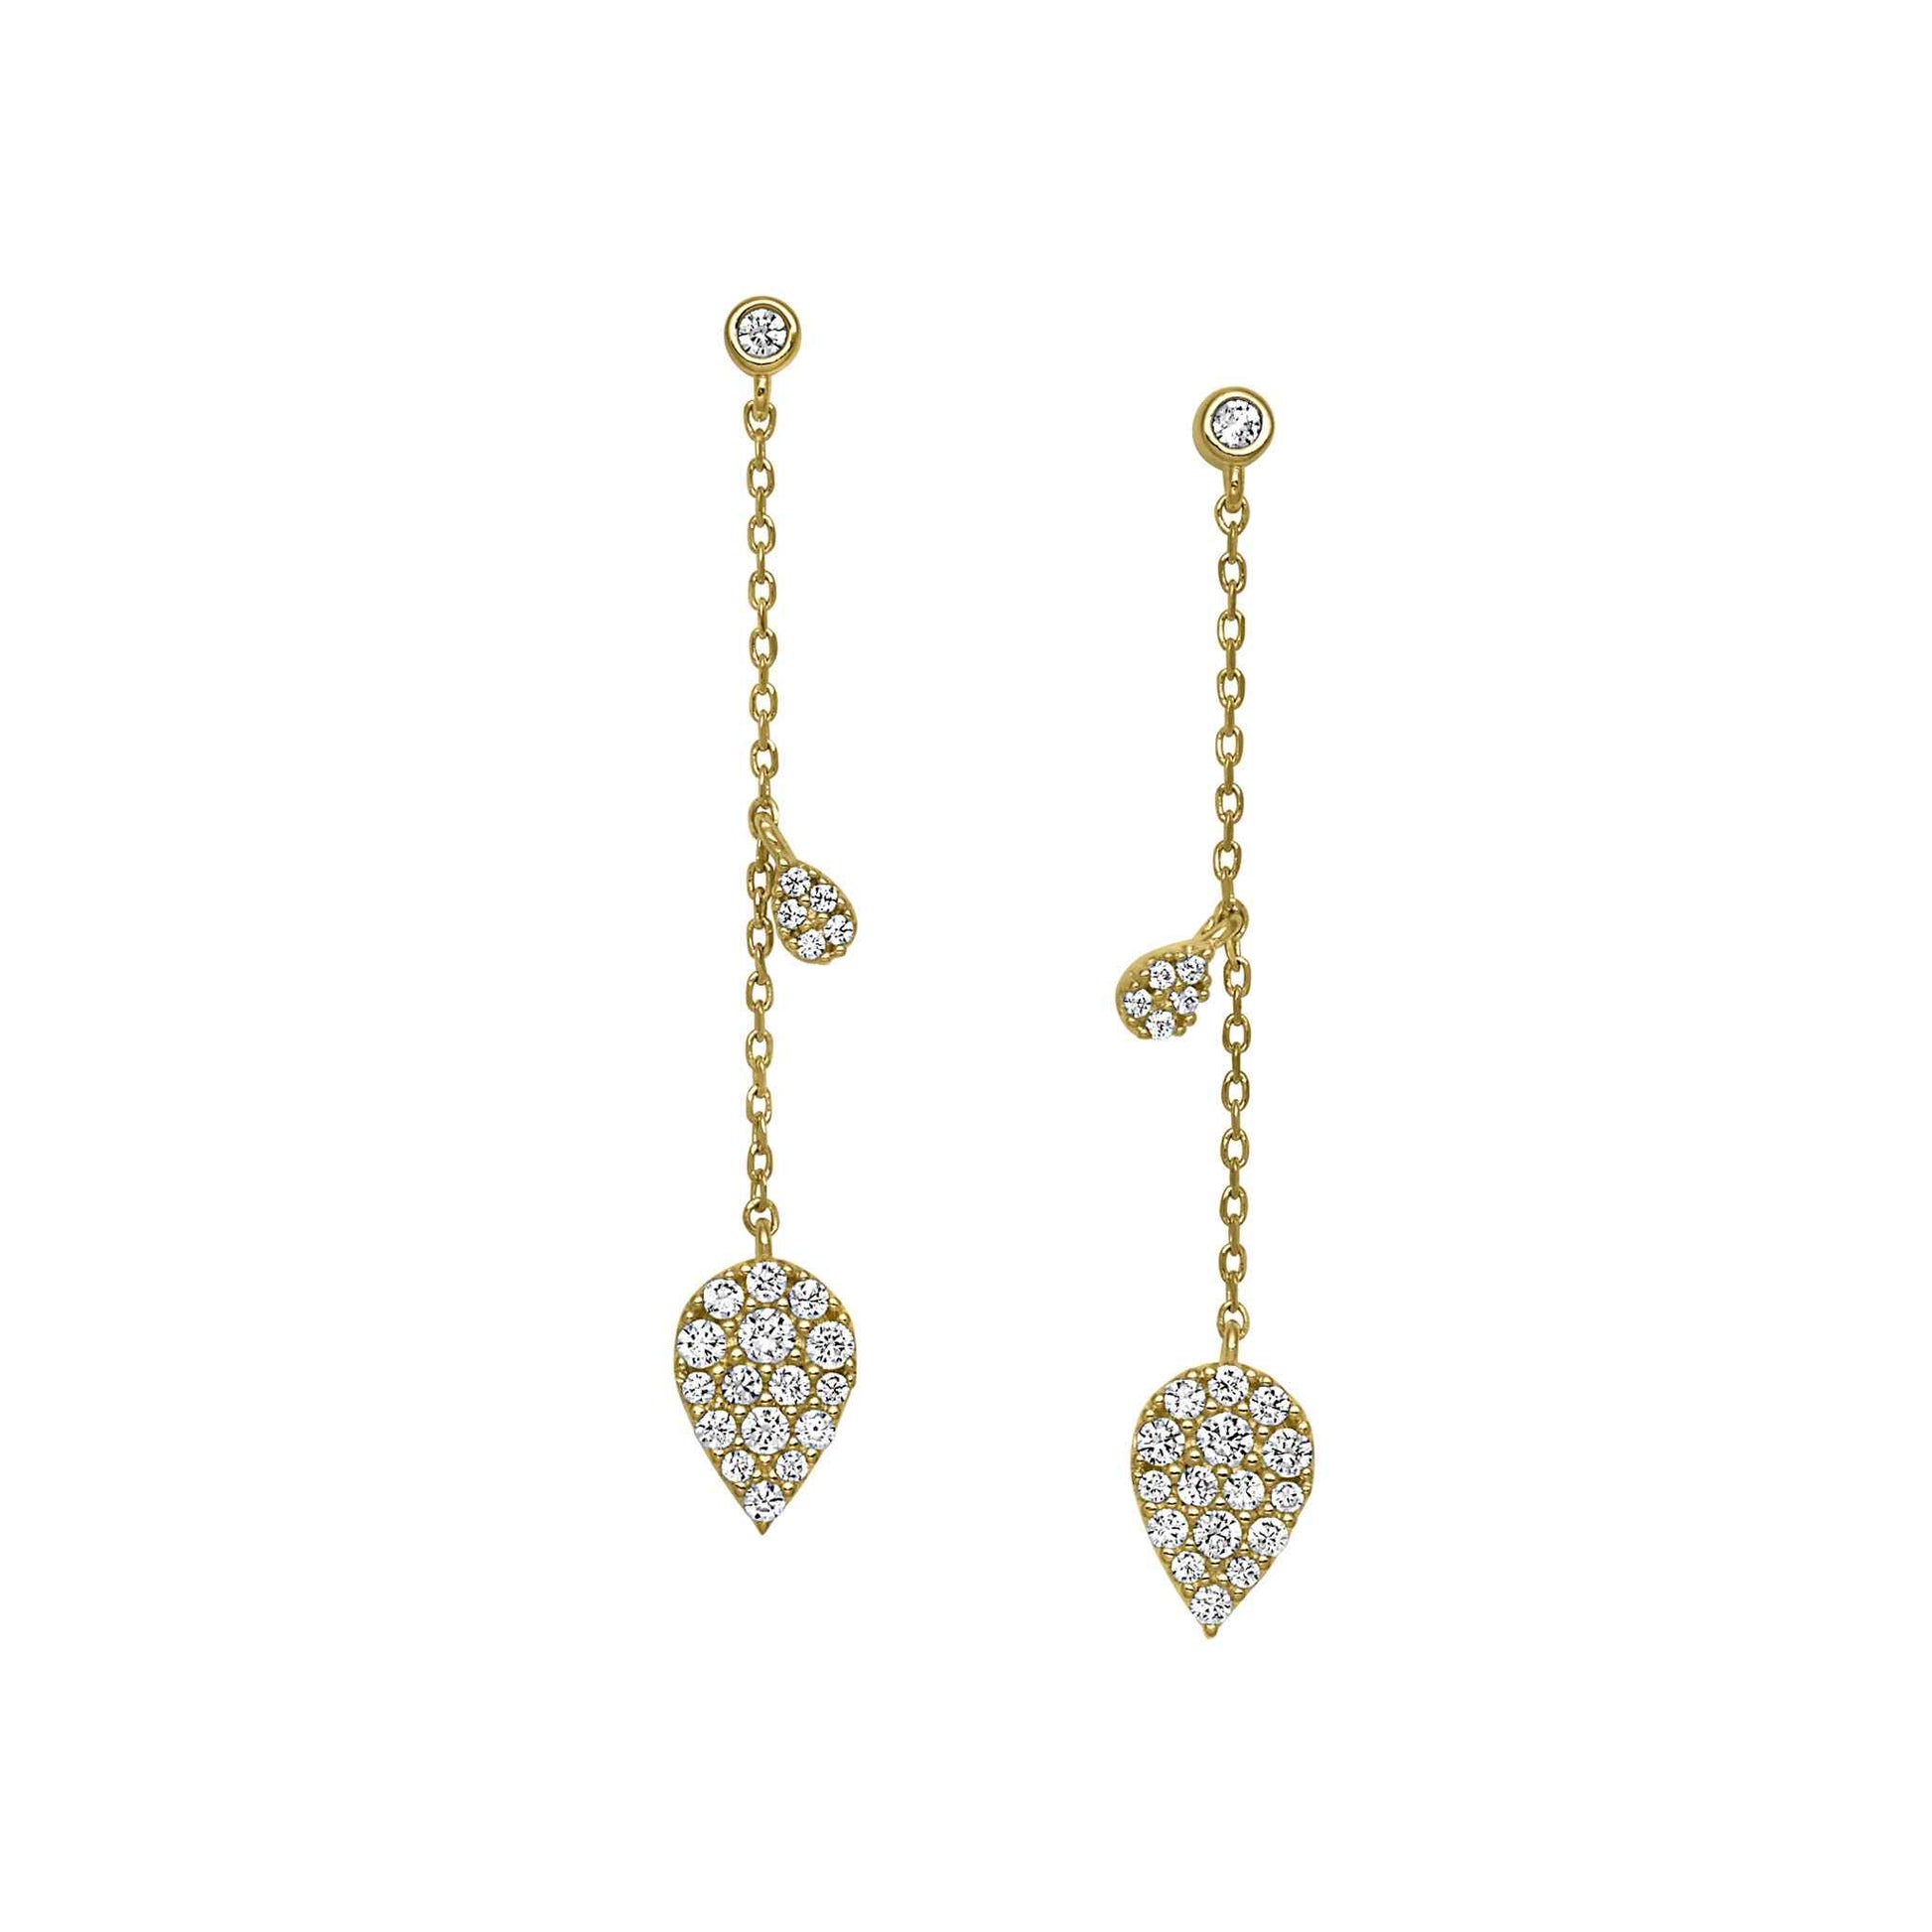 A sterling silver leaf drop earrings with simulated diamonds displayed on a neutral white background.